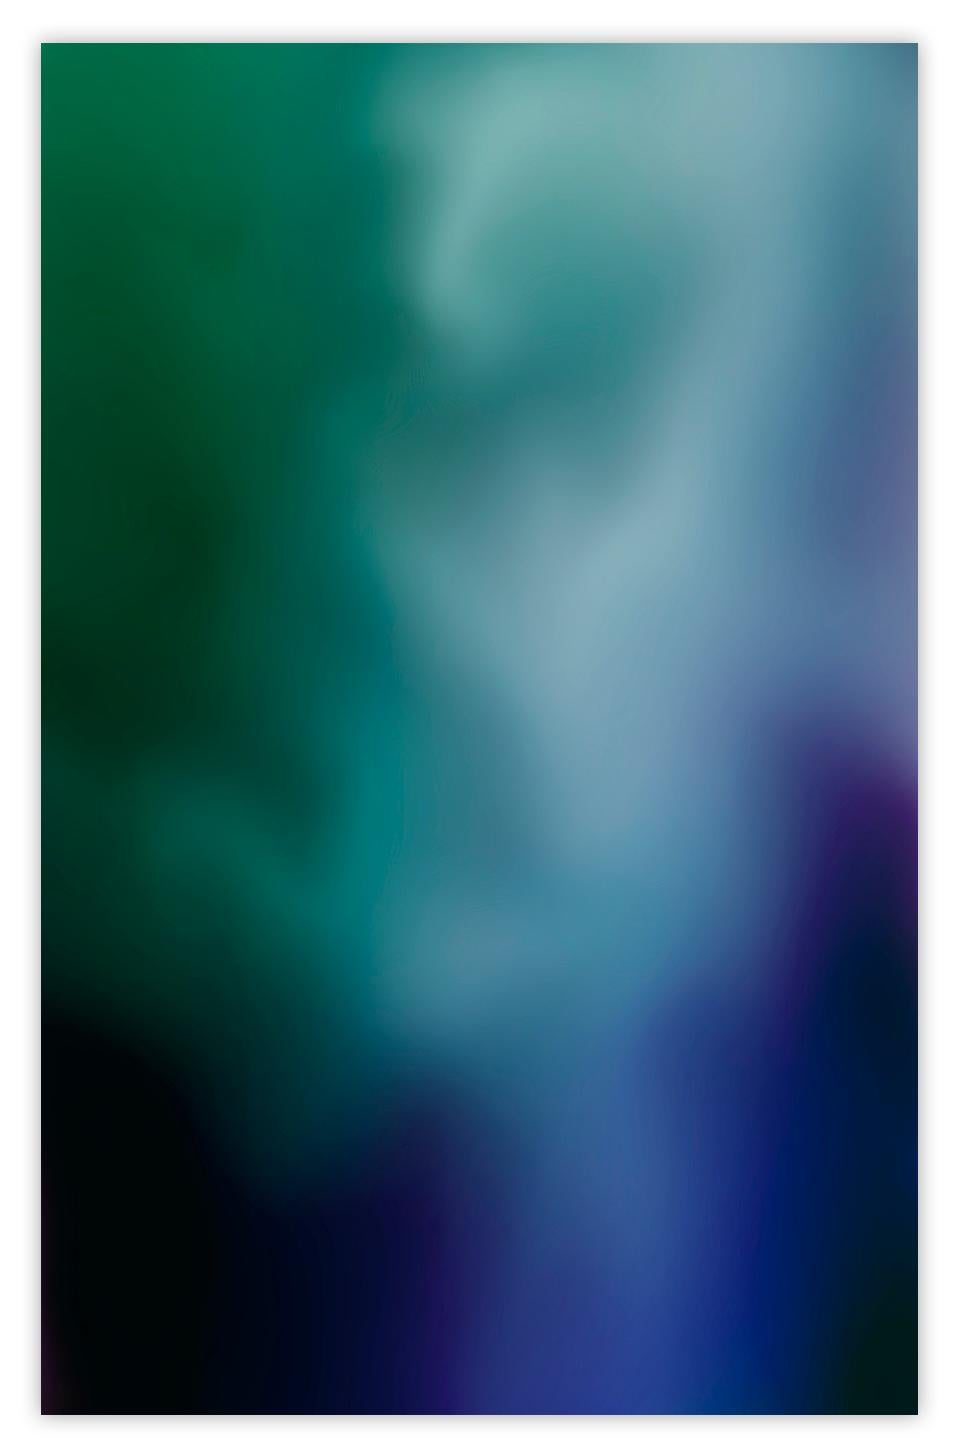 Bleed # 202181 (Abstract Photography)
Chromogenic Print Face-mounted 3mm Matte Plexiglas — Unframed.
Edition: 1/3.
Work can be hung with either the WallCleat system (support bar supplied) or the screw-eye system if it needs support from wire or